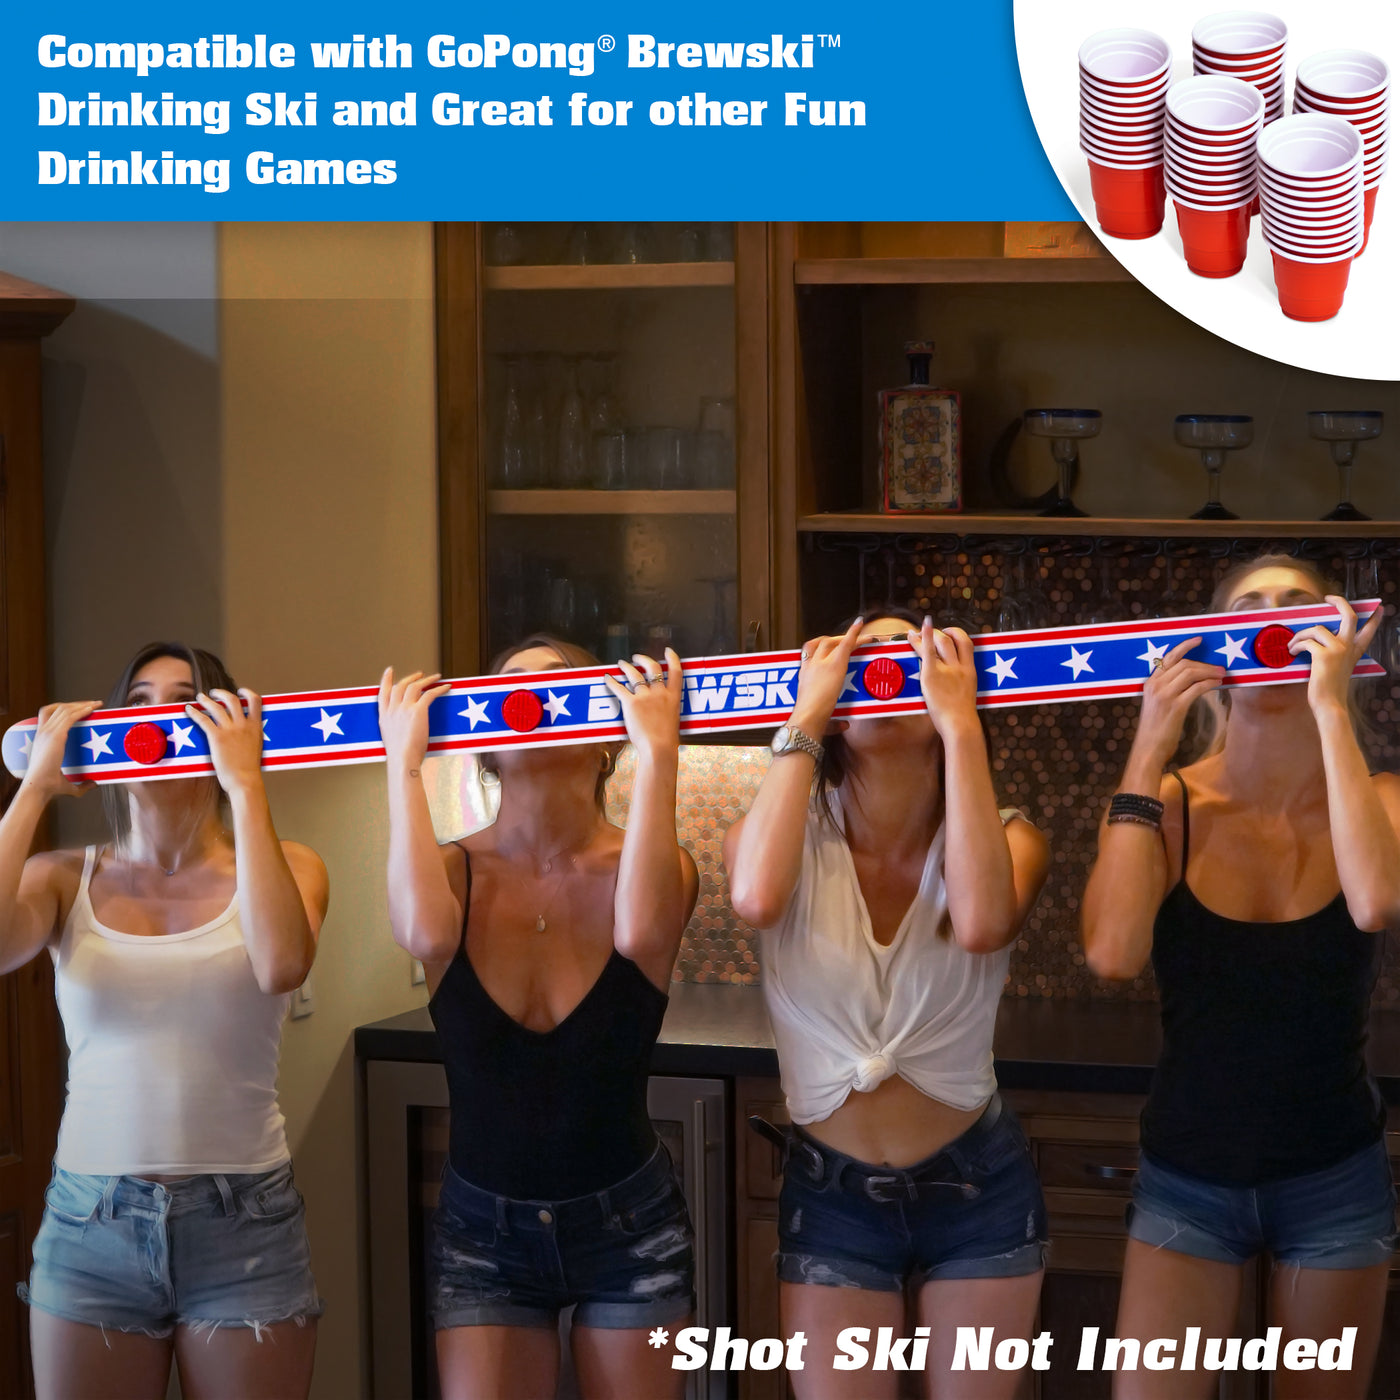  GoPong GoBig Red Party Cup Bowls - Disposable Plastic